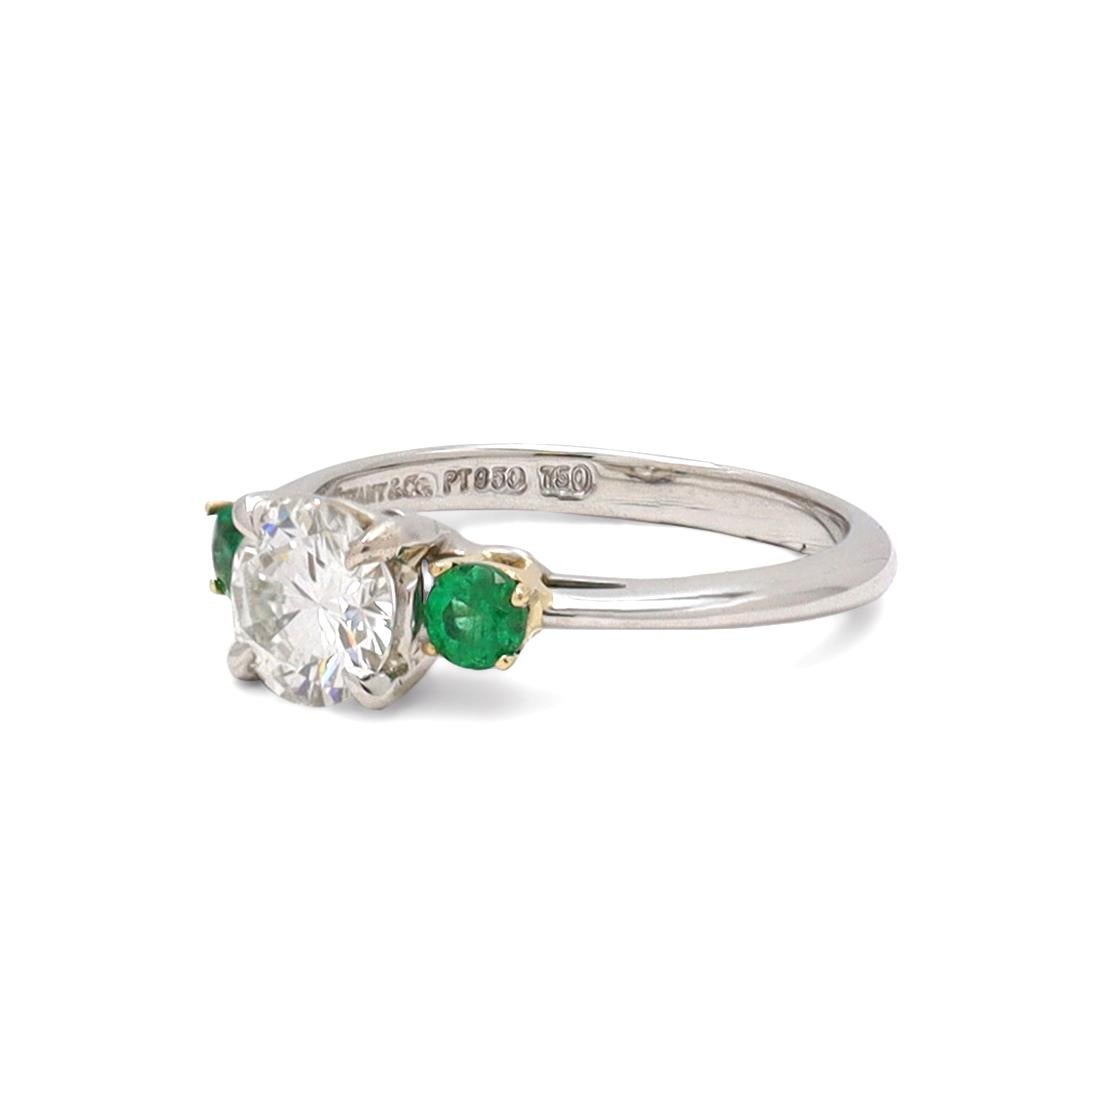 Authentic Tiffany & Co. ring crafted in platinum and set with a stunning 0.71 carat GIA certified Diamond (I/VVS1) and two lively emeralds with a deeply saturated yellowish-green hue, weighing approximately 0.10 carat each. US size 4 3/4. Signed